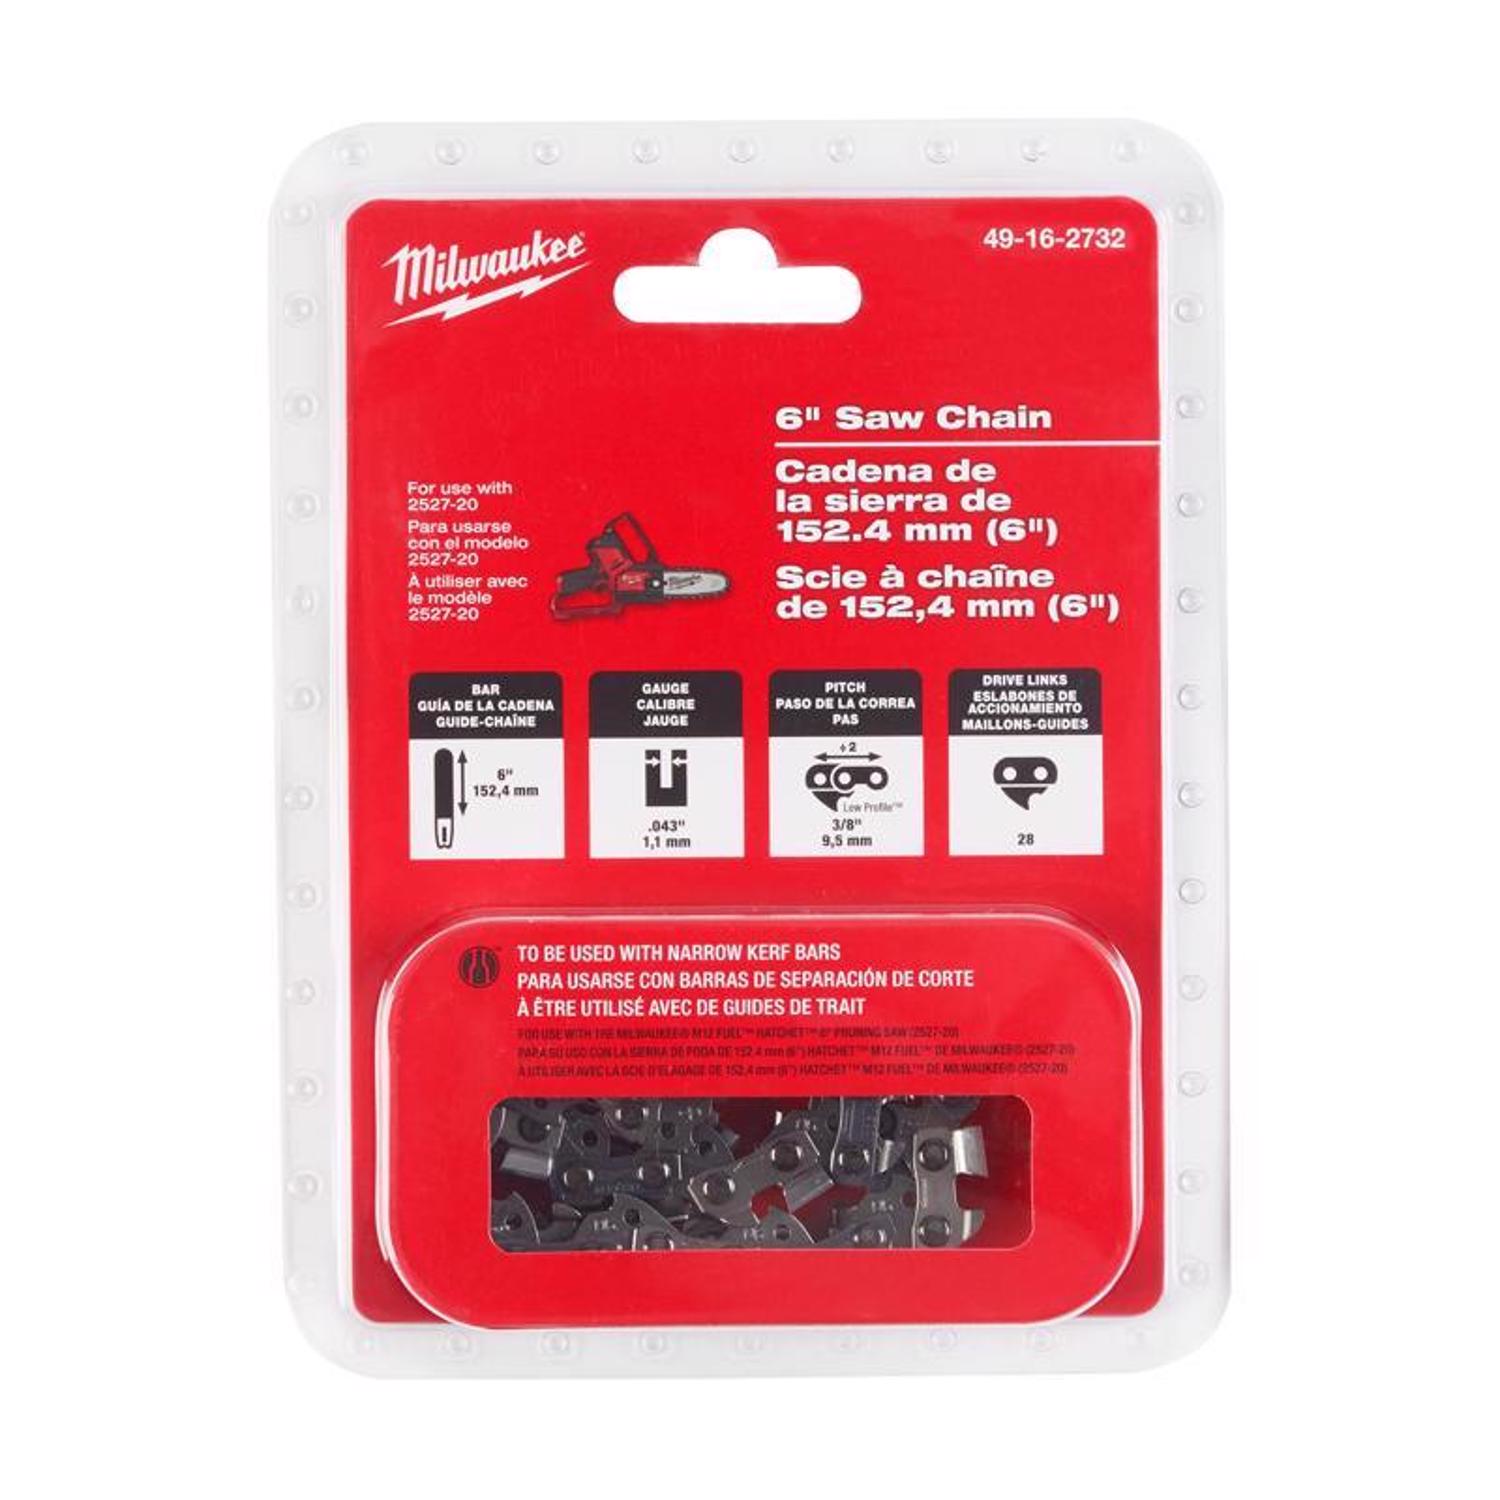 Photos - Chain / Reciprocating Saw Blade Milwaukee 6 in. Replacement Chainsaw Chain 28 links 49-16-2732 